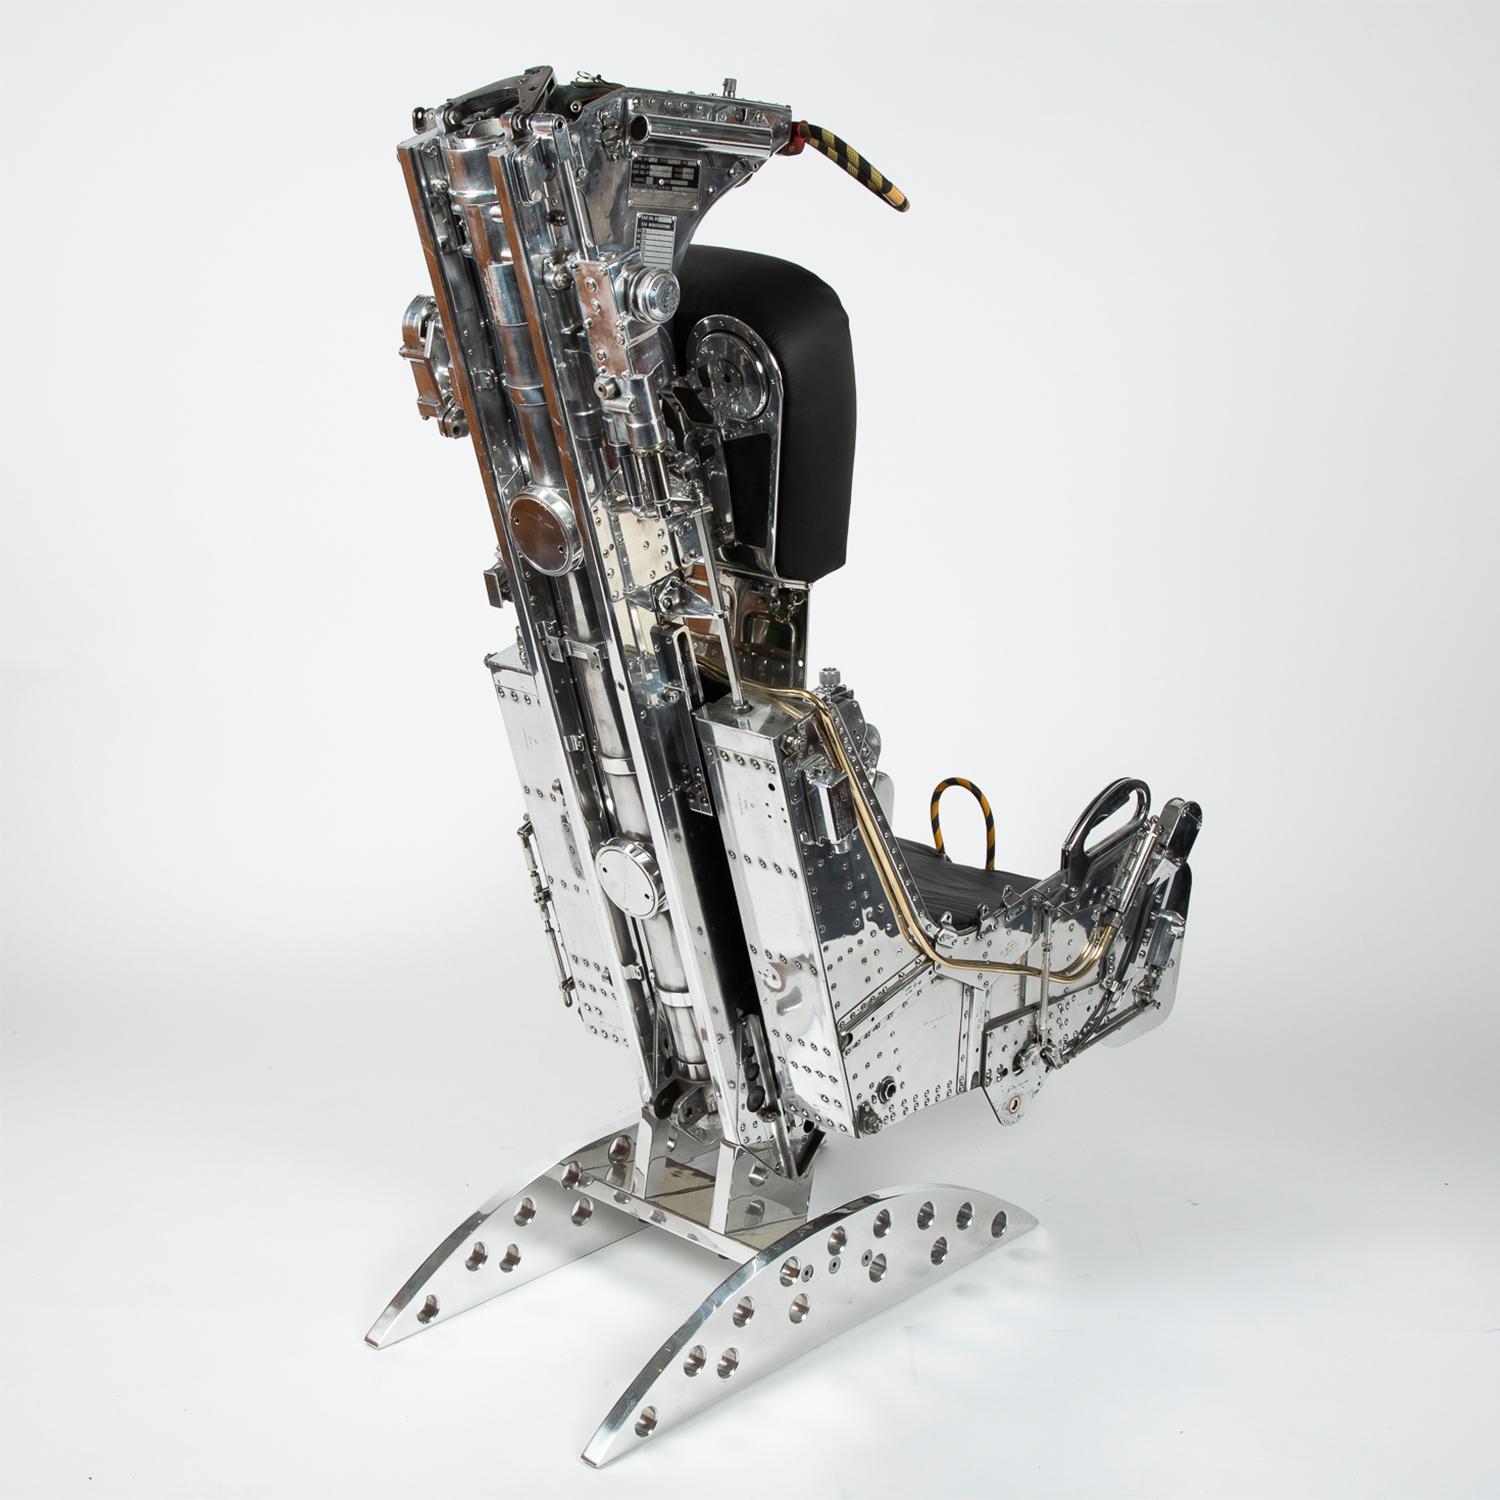 martin-baker ejection seat